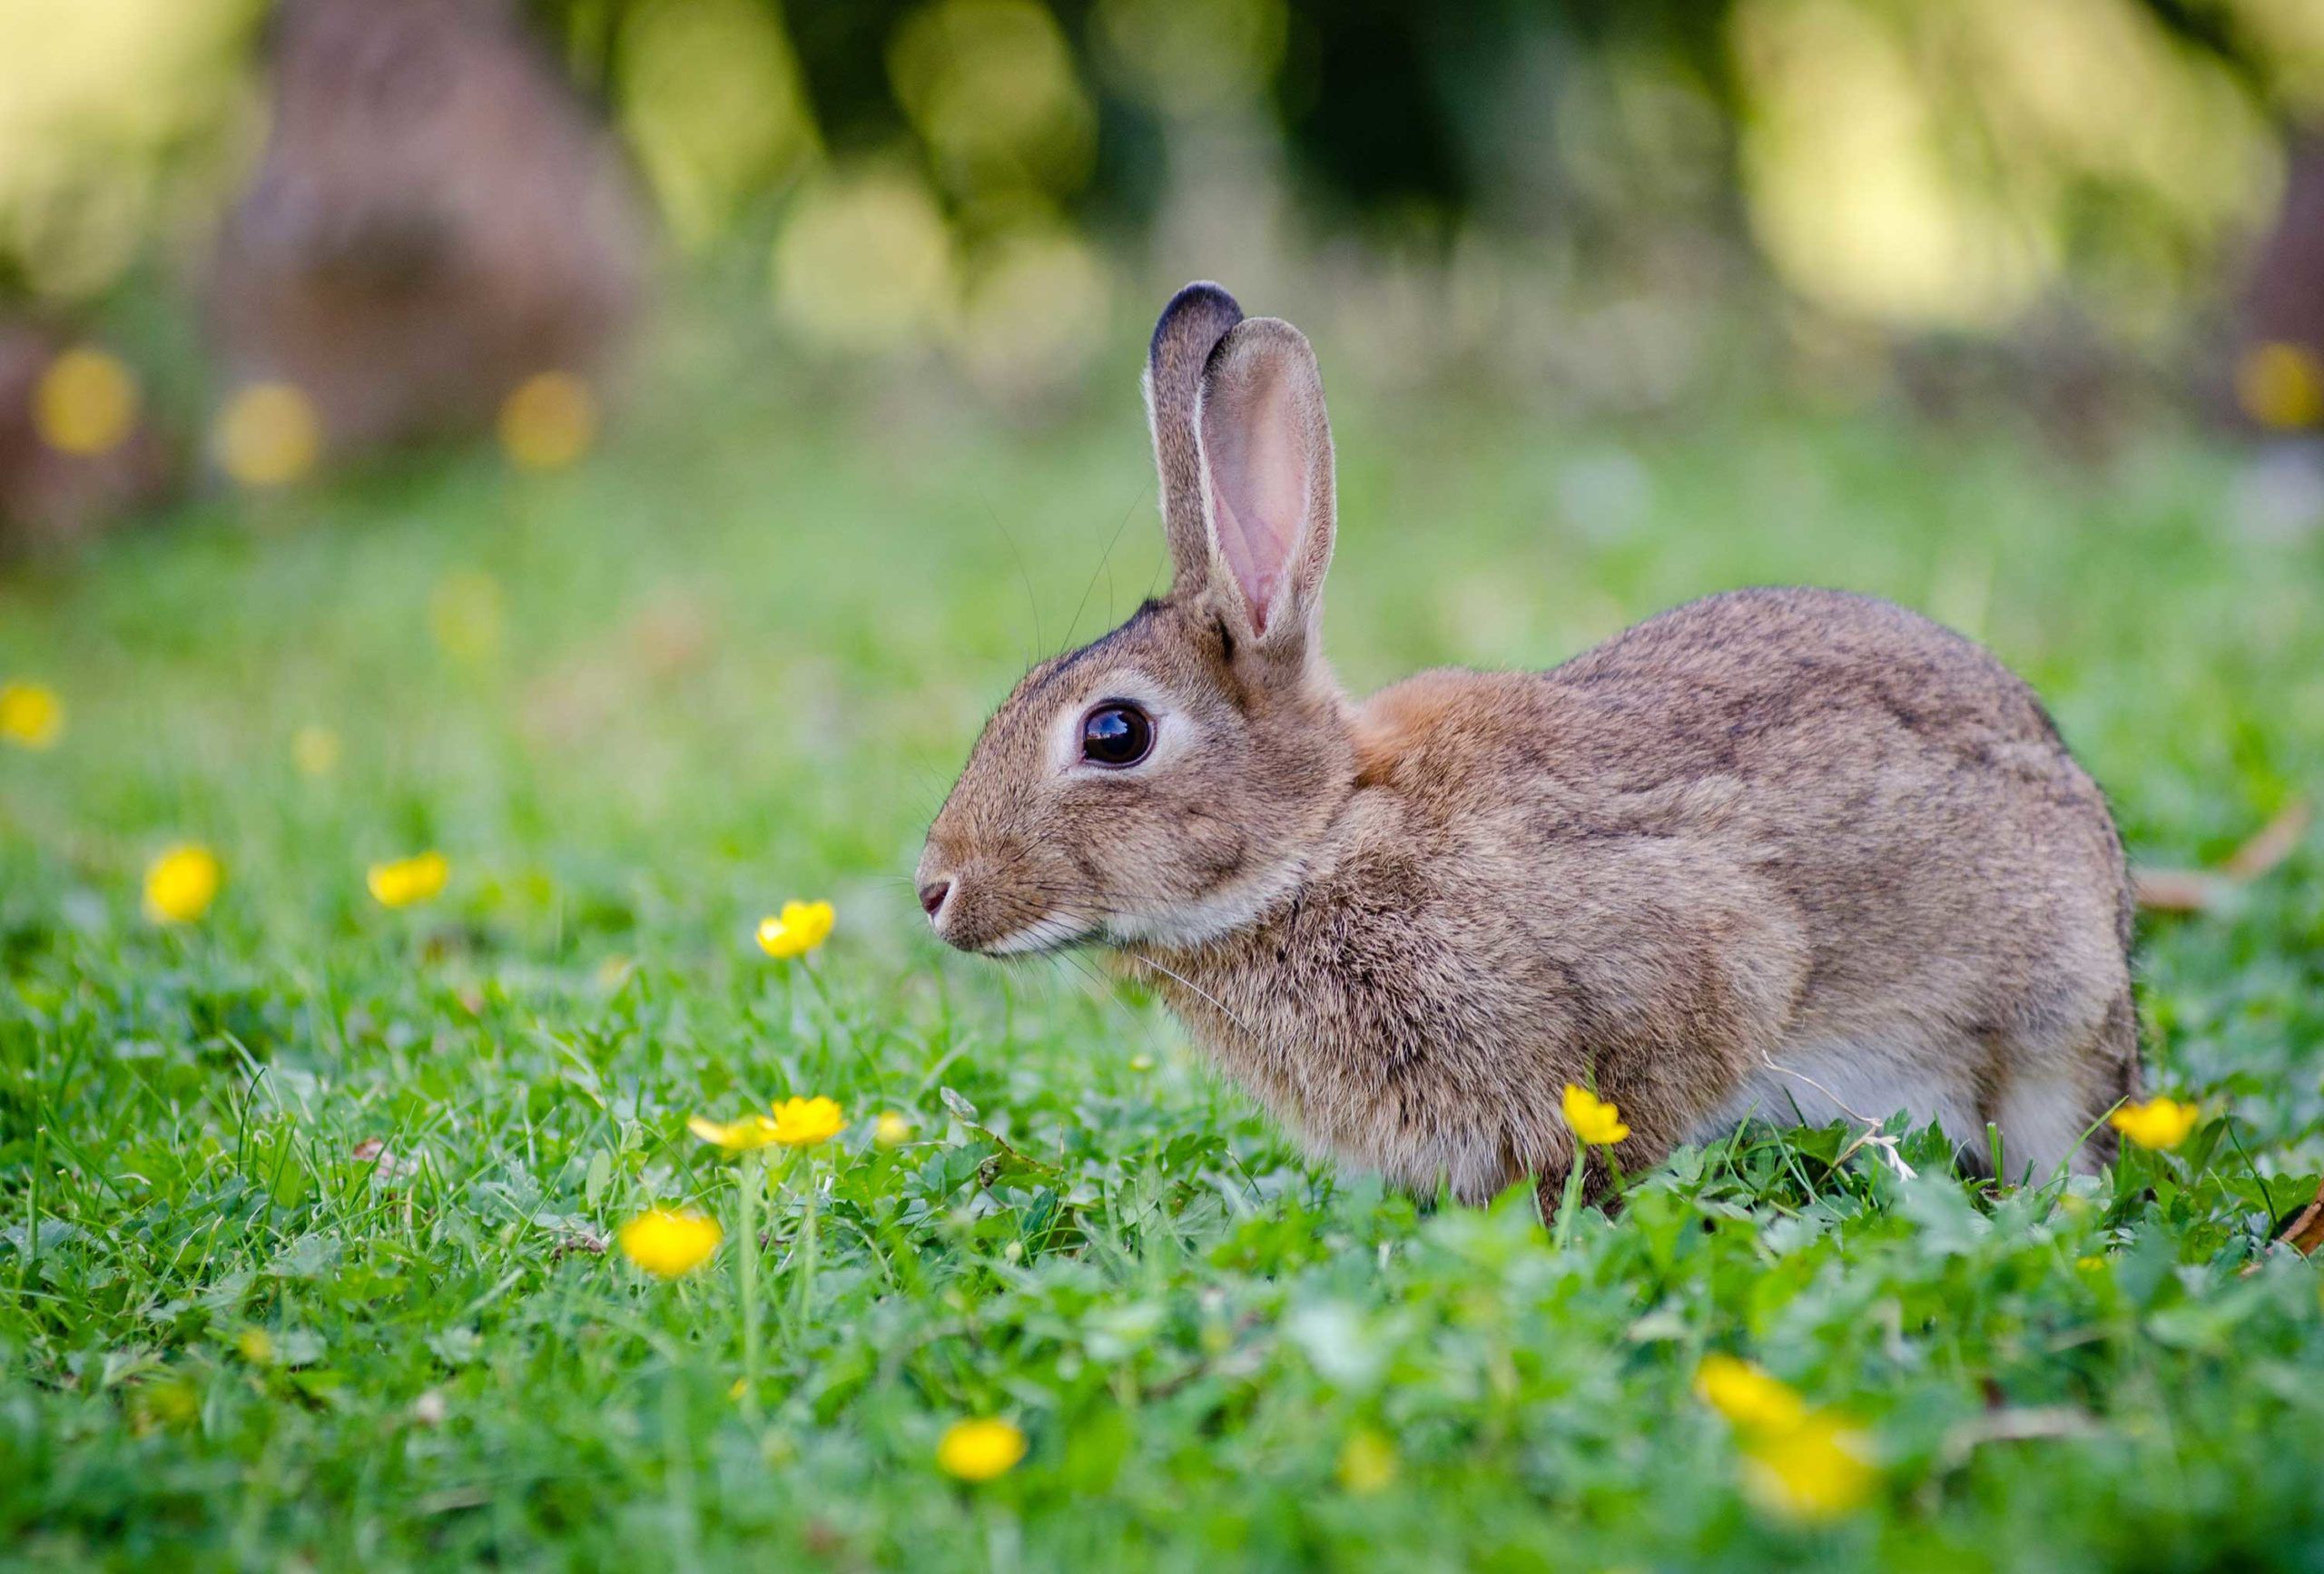 pexels-flickr-148125---A-bunny-thing;-the-role-of-rabbits